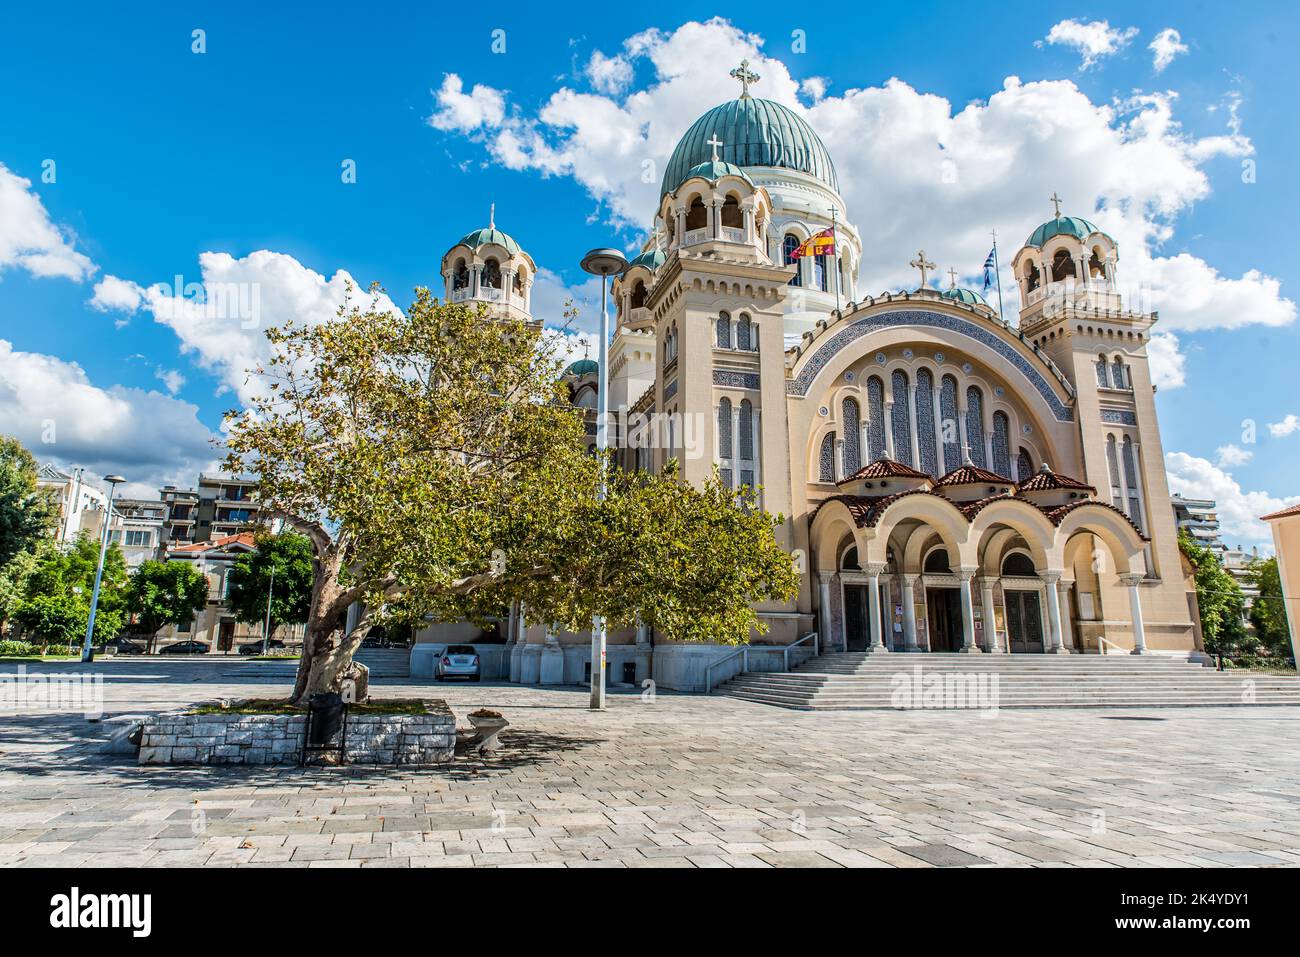 Agios Andreas the landmark church and the metropolis of Patras on a beautiful day with perfect sky color and few clouds, Achaia, Peloponnese, Greece Stock Photo